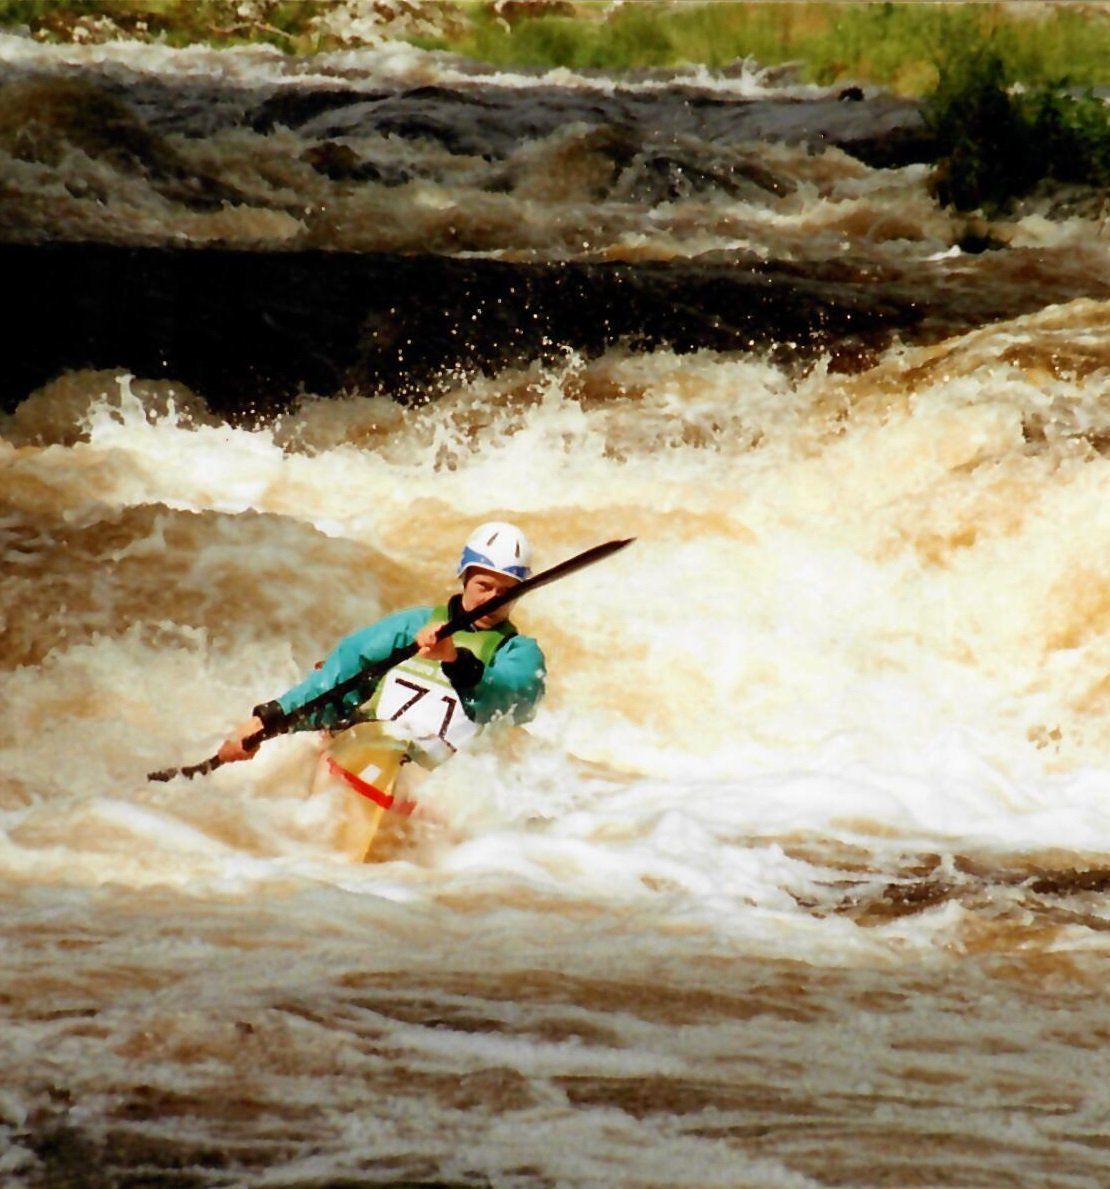 Racing kayak events at the National White Water Centre